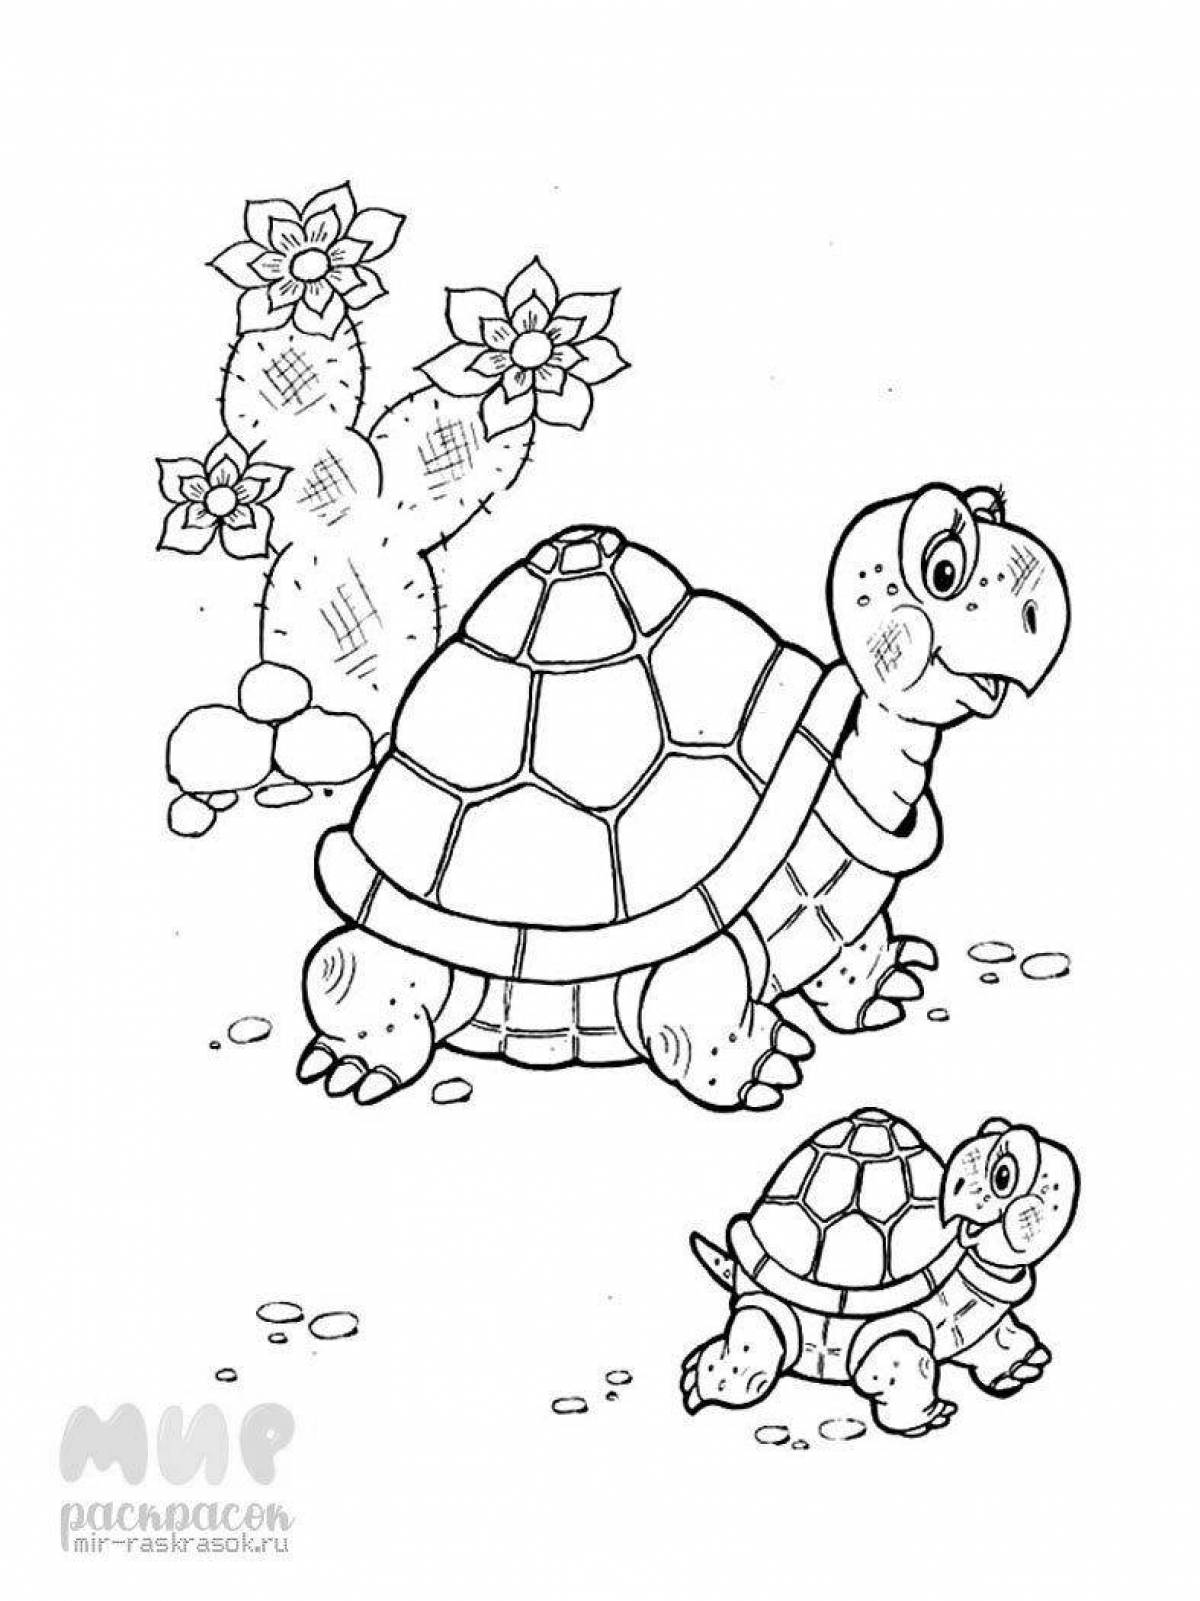 Amazing turtle coloring book for kids